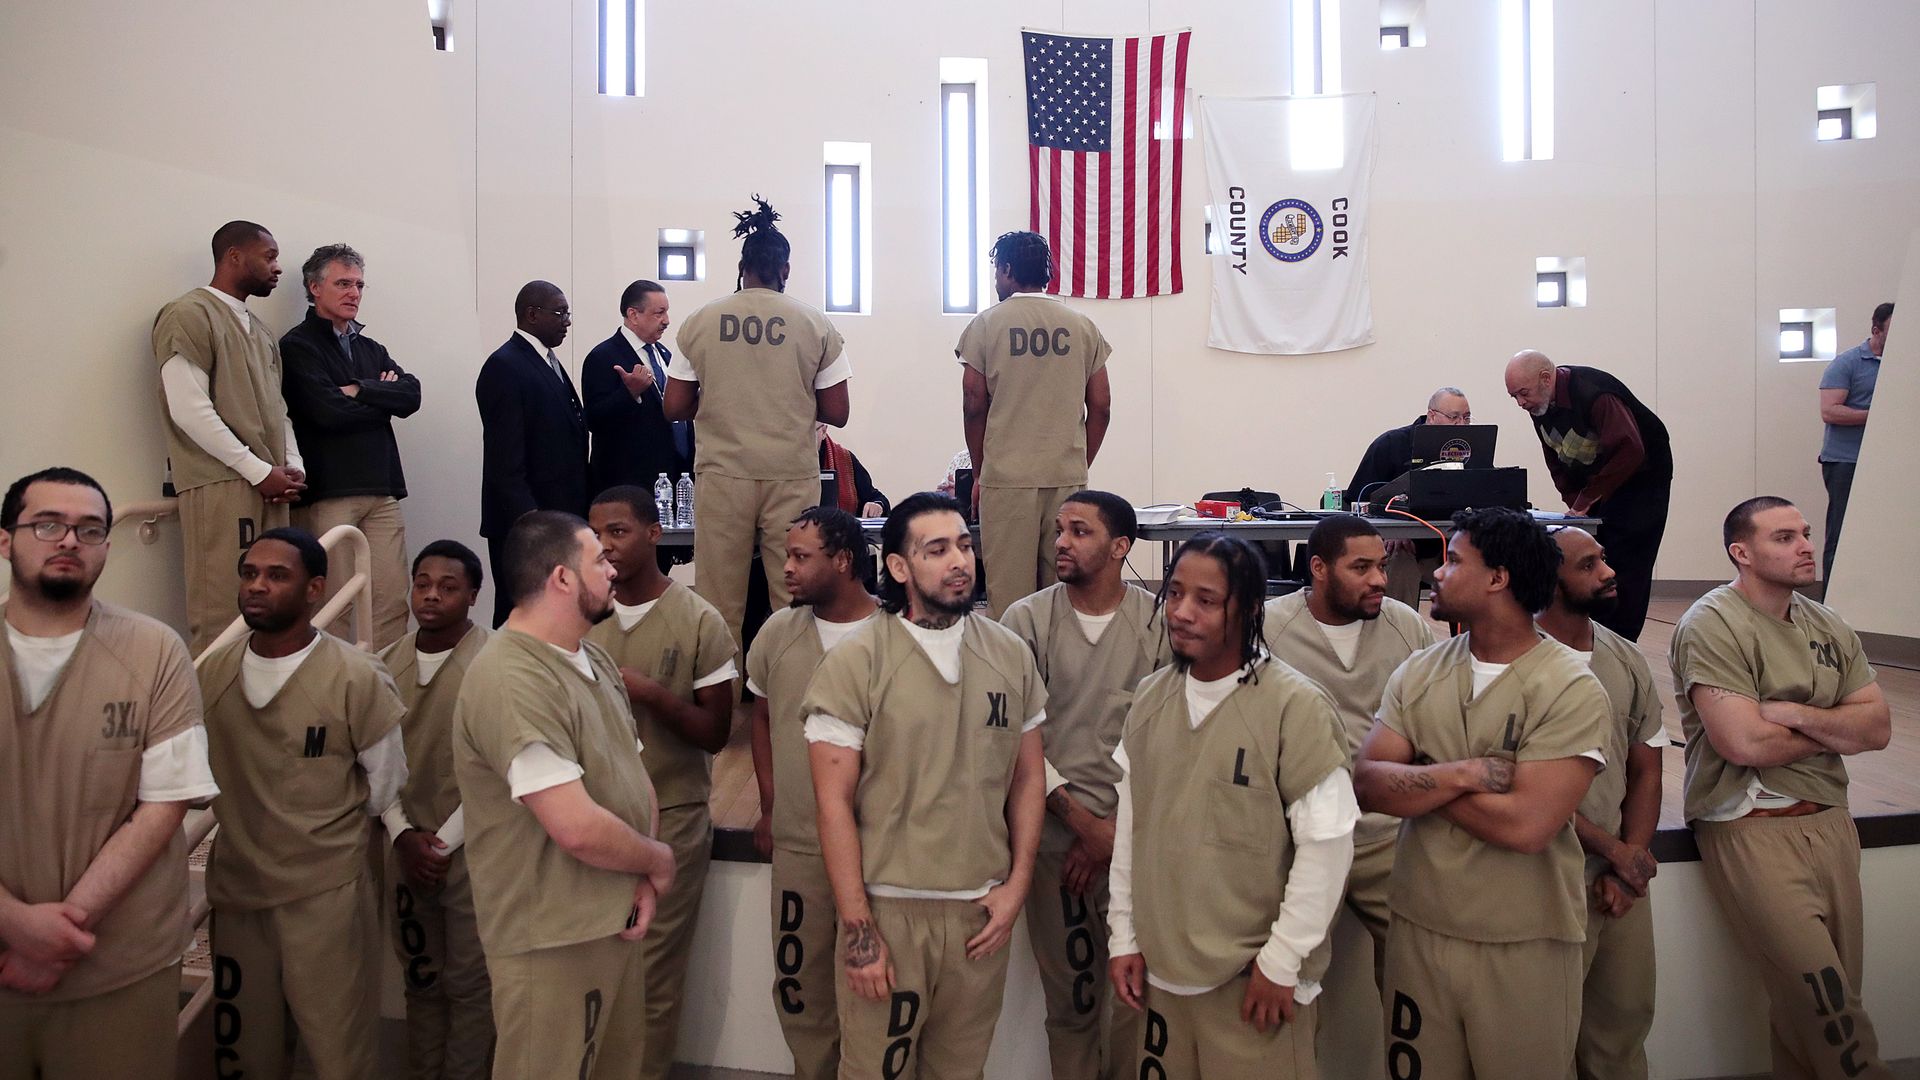 In this image, inmates vote under an American flag